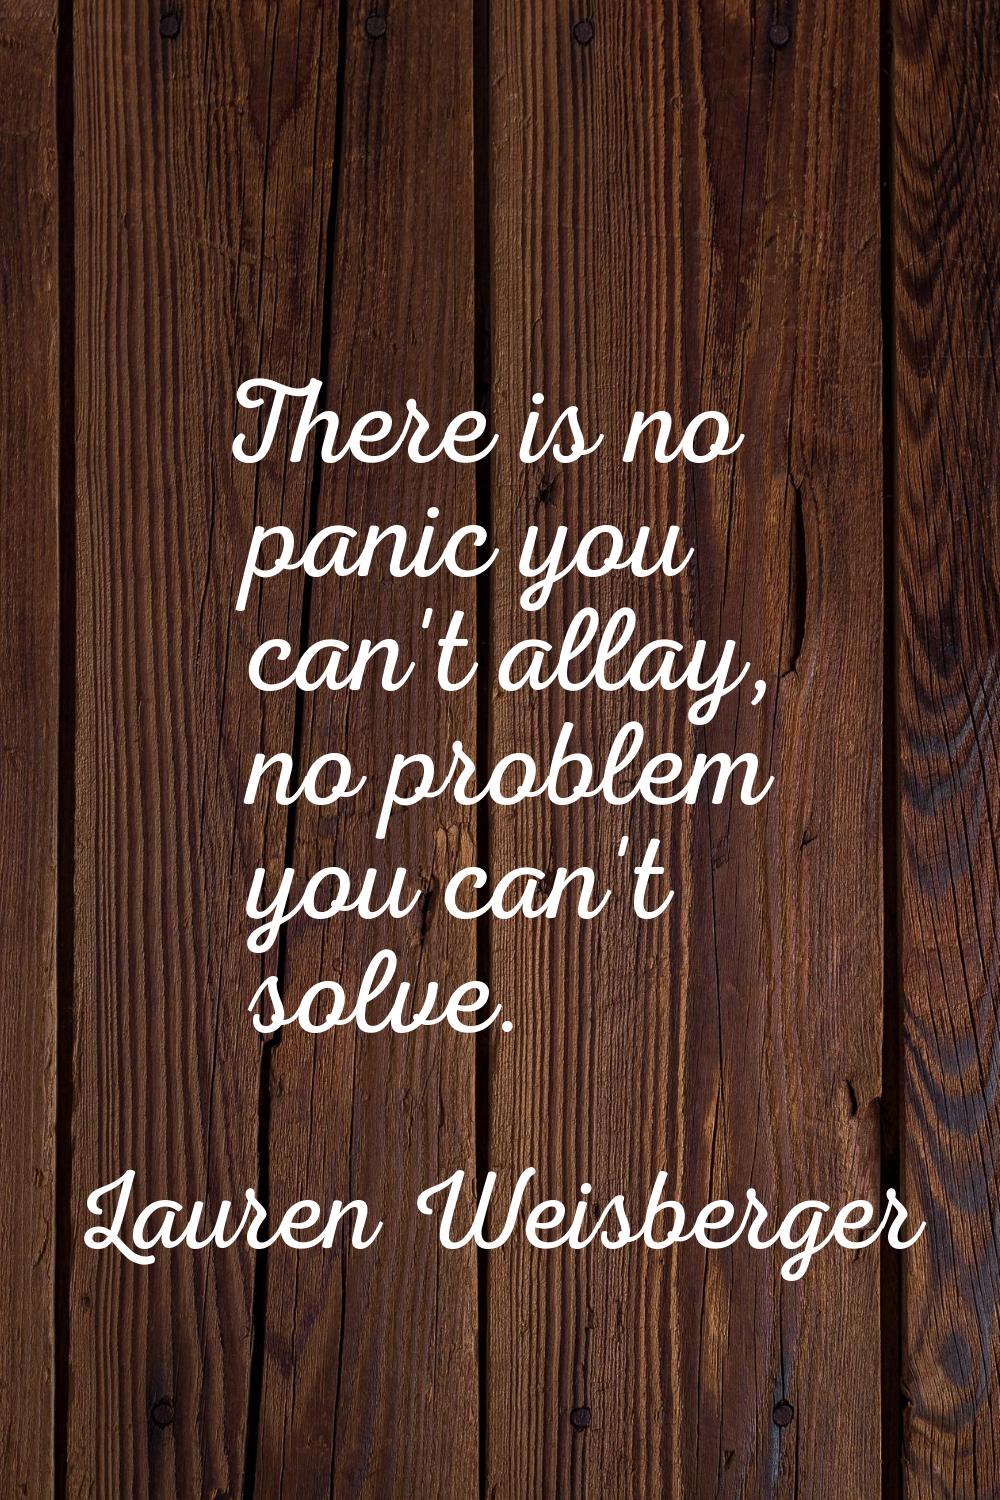 There is no panic you can't allay, no problem you can't solve.